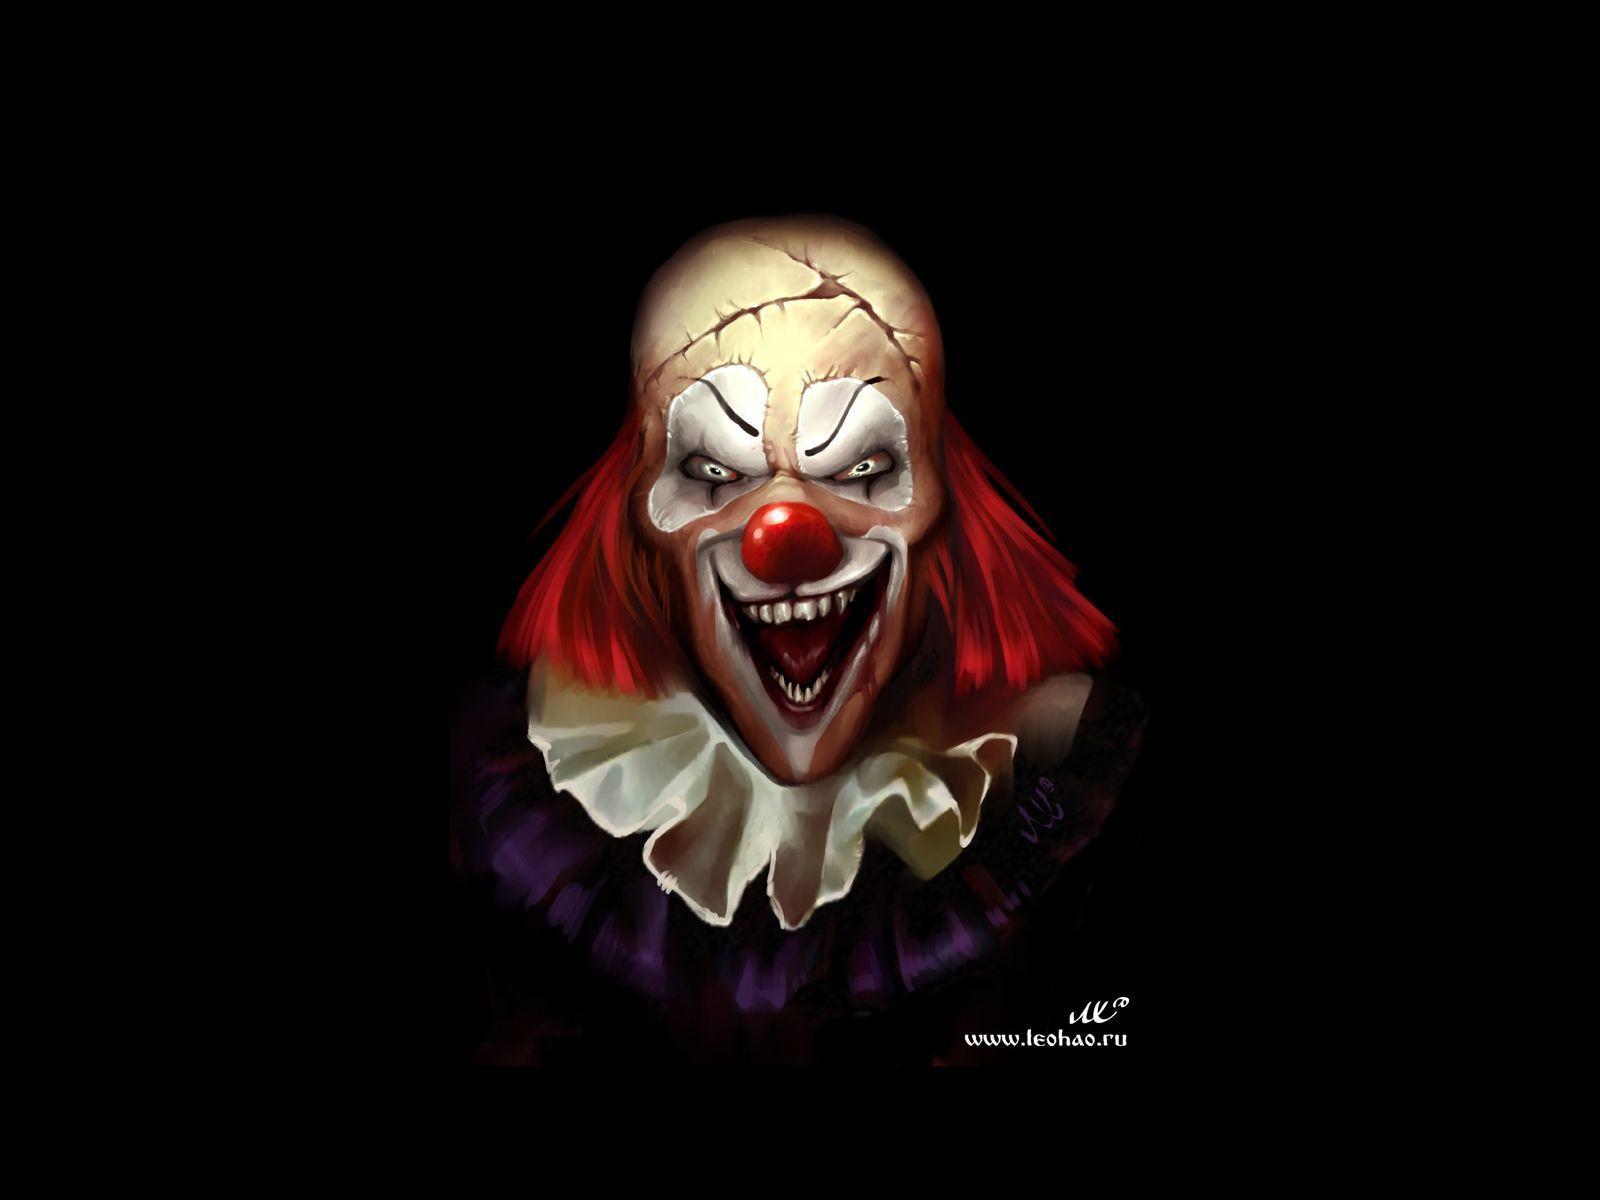 Scary Clown Wallpaper Image for Android